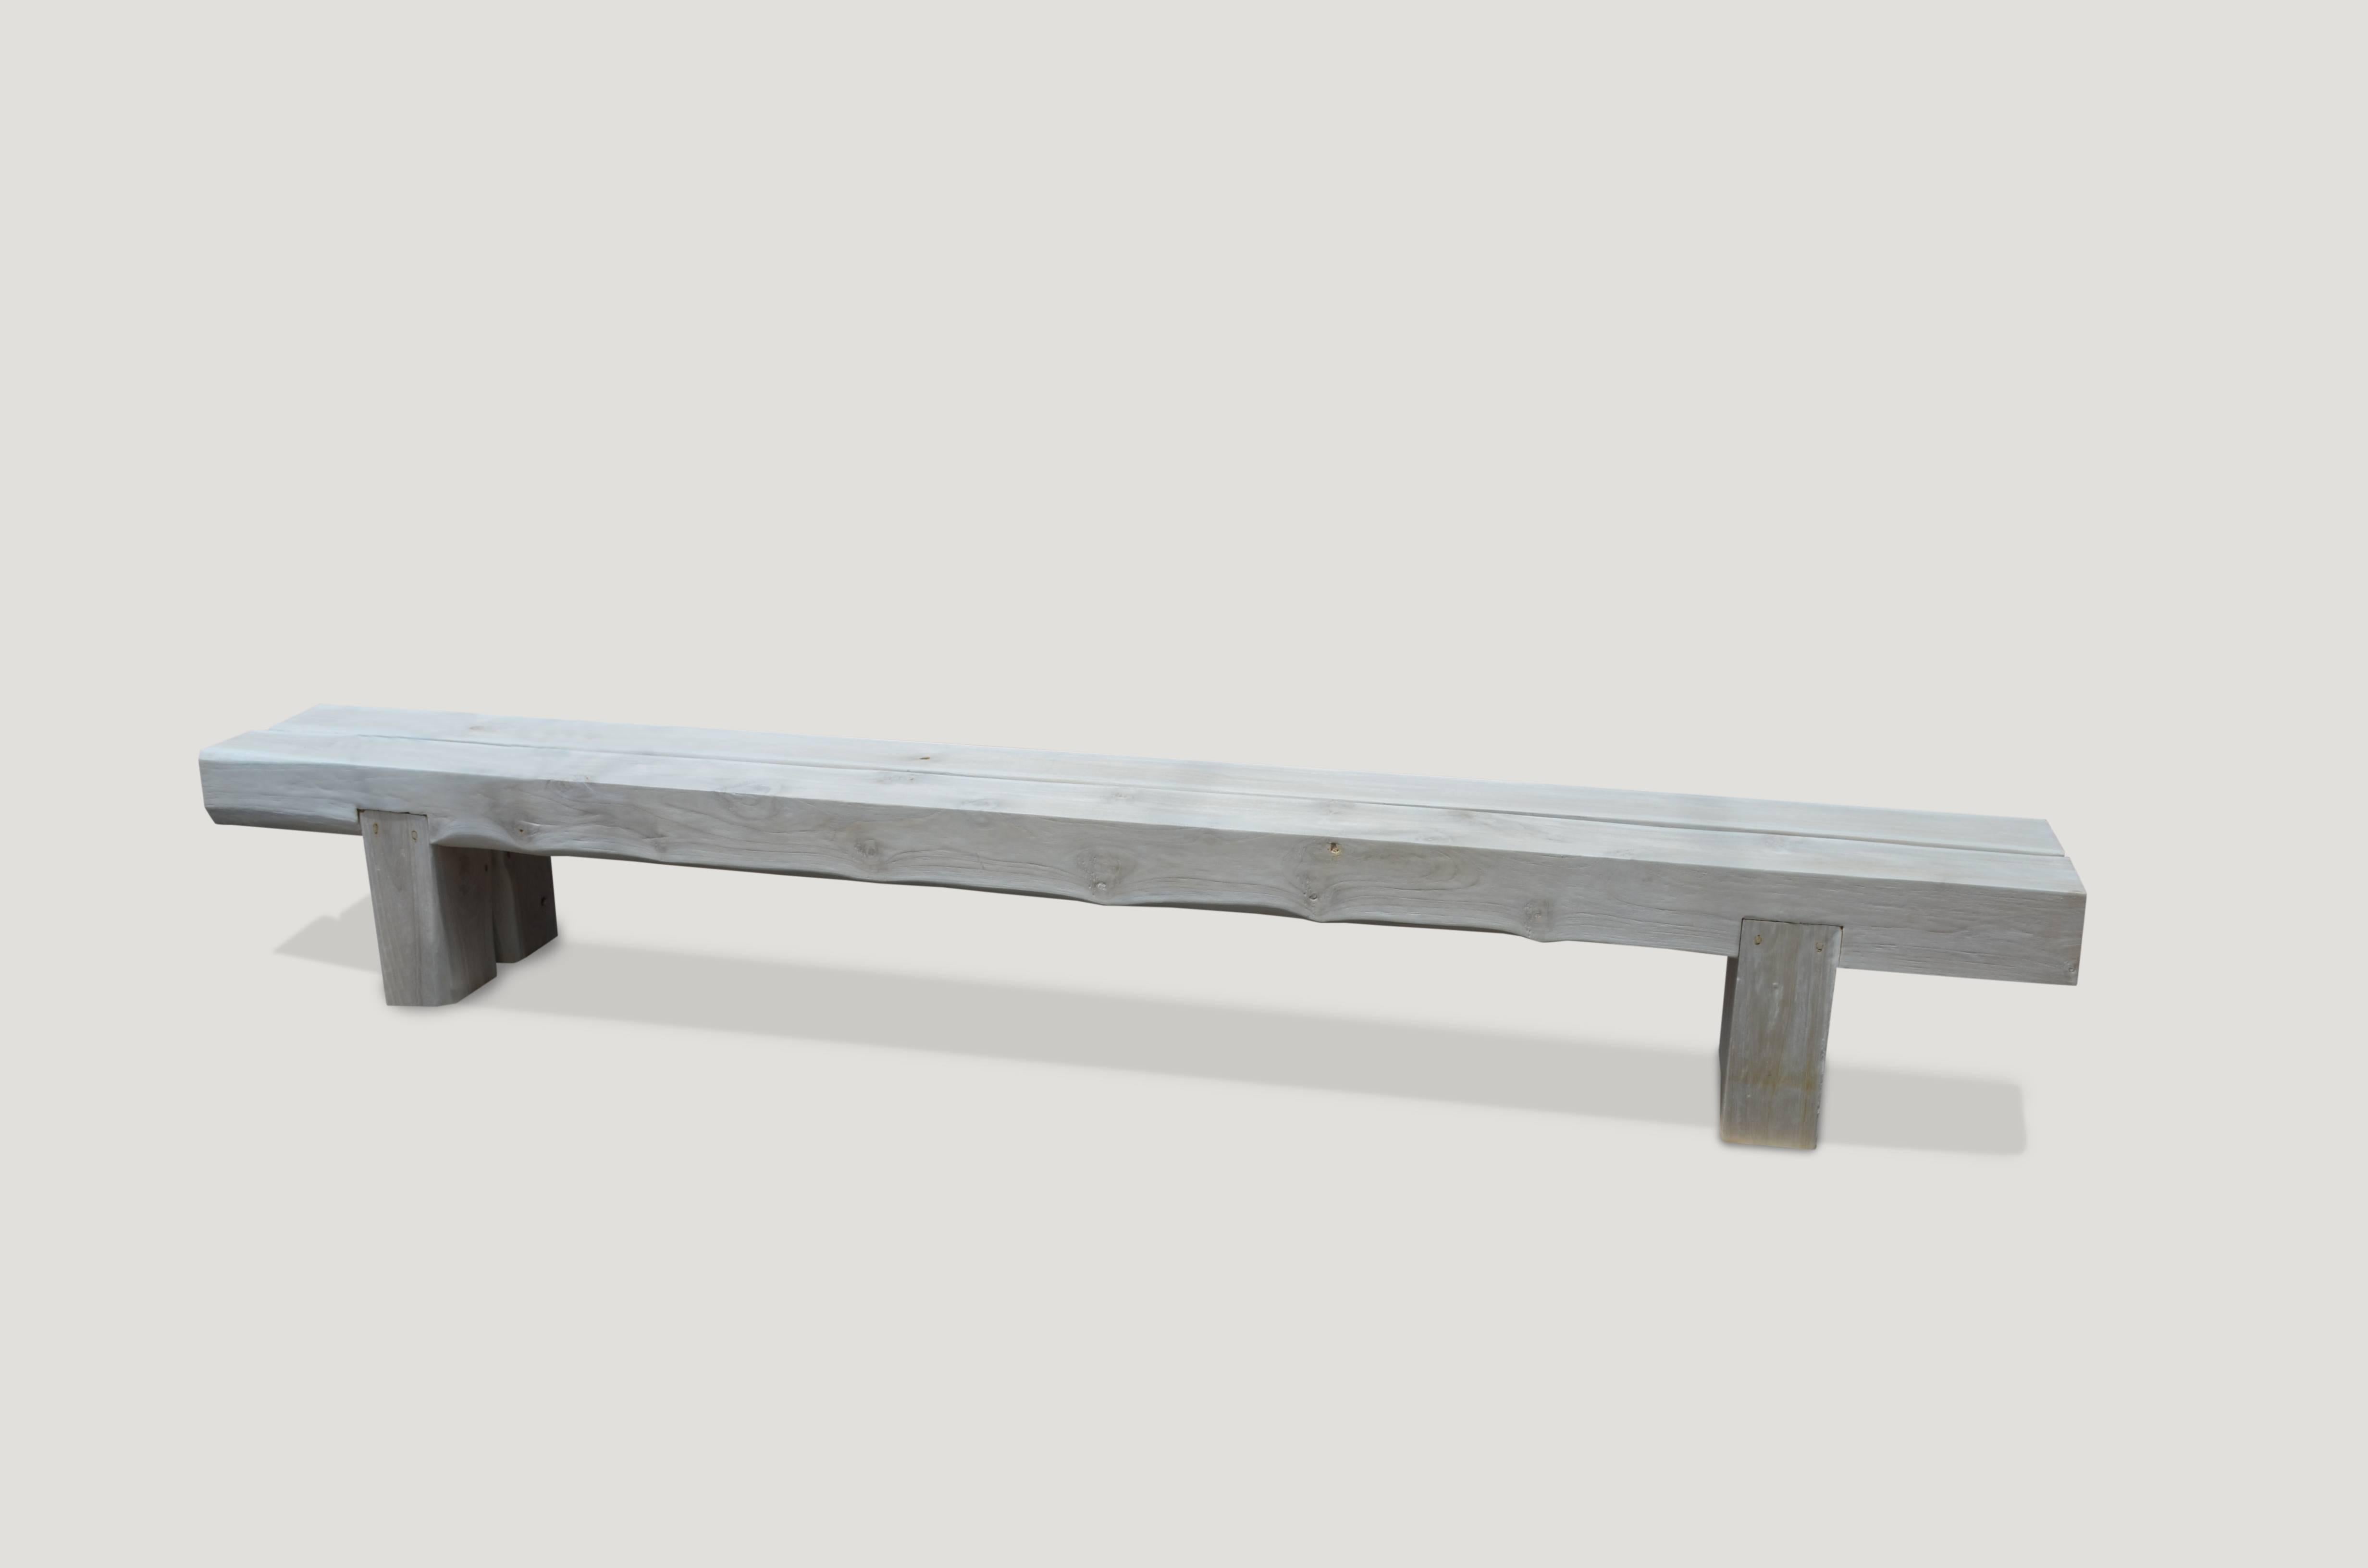 Impressive reclaimed bleached teak wood log bench. Perfect for inside or outside living. The two top pieces rest on a modern teak base. Custom finishes available.

The St. Barts collection features an exciting new line of organic white wash and